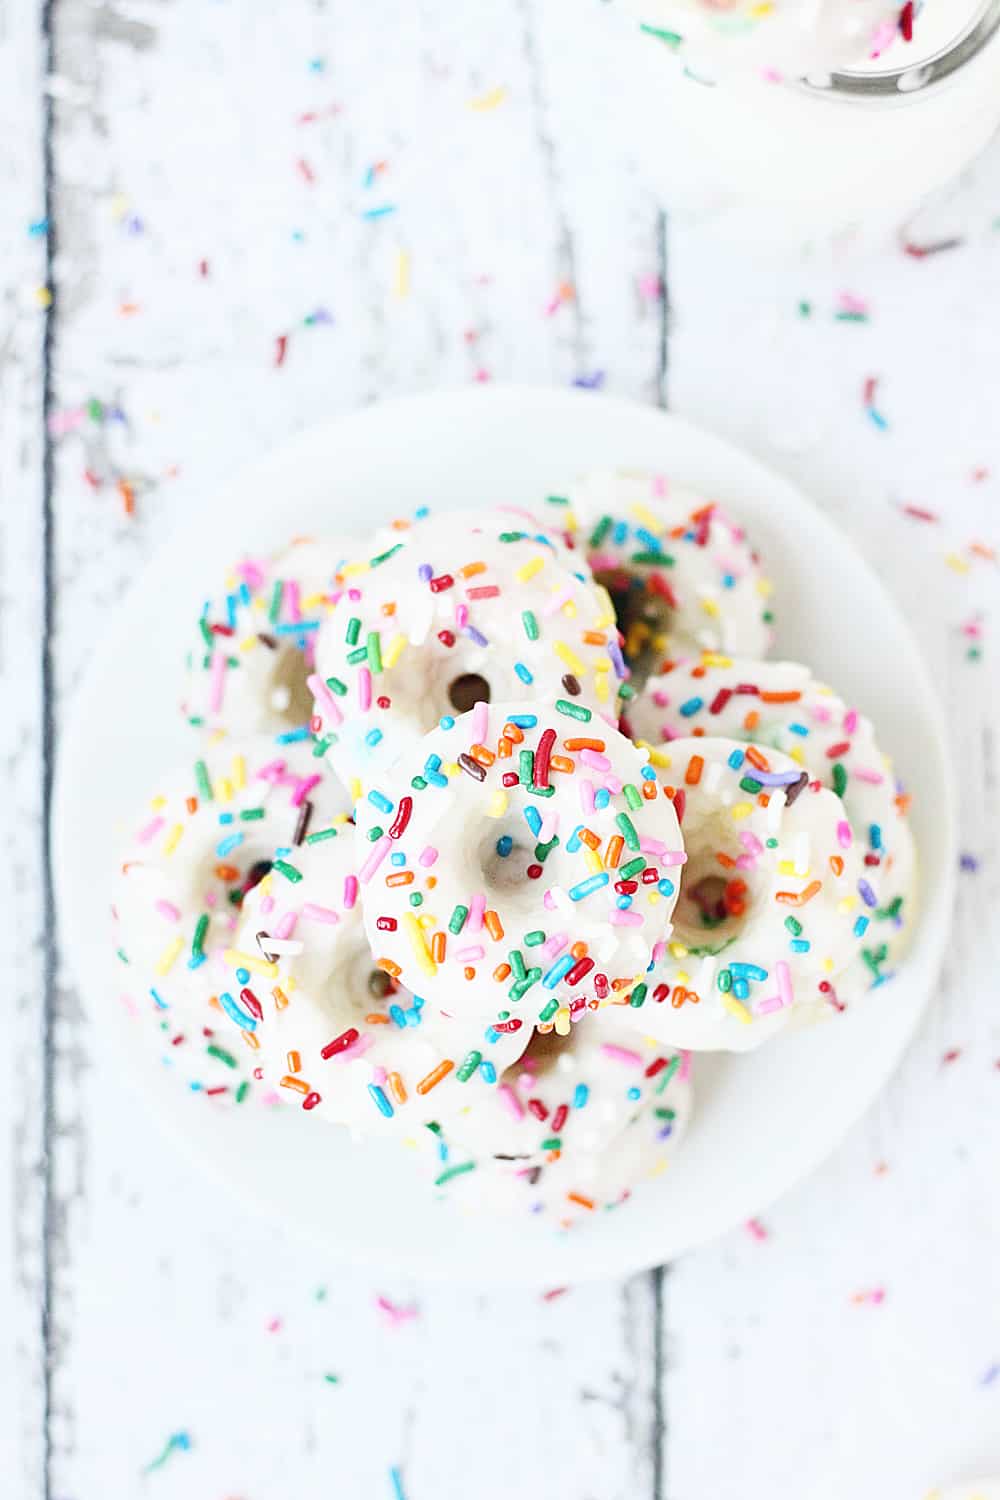 Mini Funfetti Cake Mix Donuts with Vanilla Glaze --Mini funfetti cake mix donuts are the perfect party treat! Topped with a vanilla glaze and colorful sprinkles, these mini donuts from cake mix are not only super cute but also super easy! #donuts #doughnut #cakemix #dessert #funfetti #bakeddonuts #recipe #dessert #cakemixrecipe 